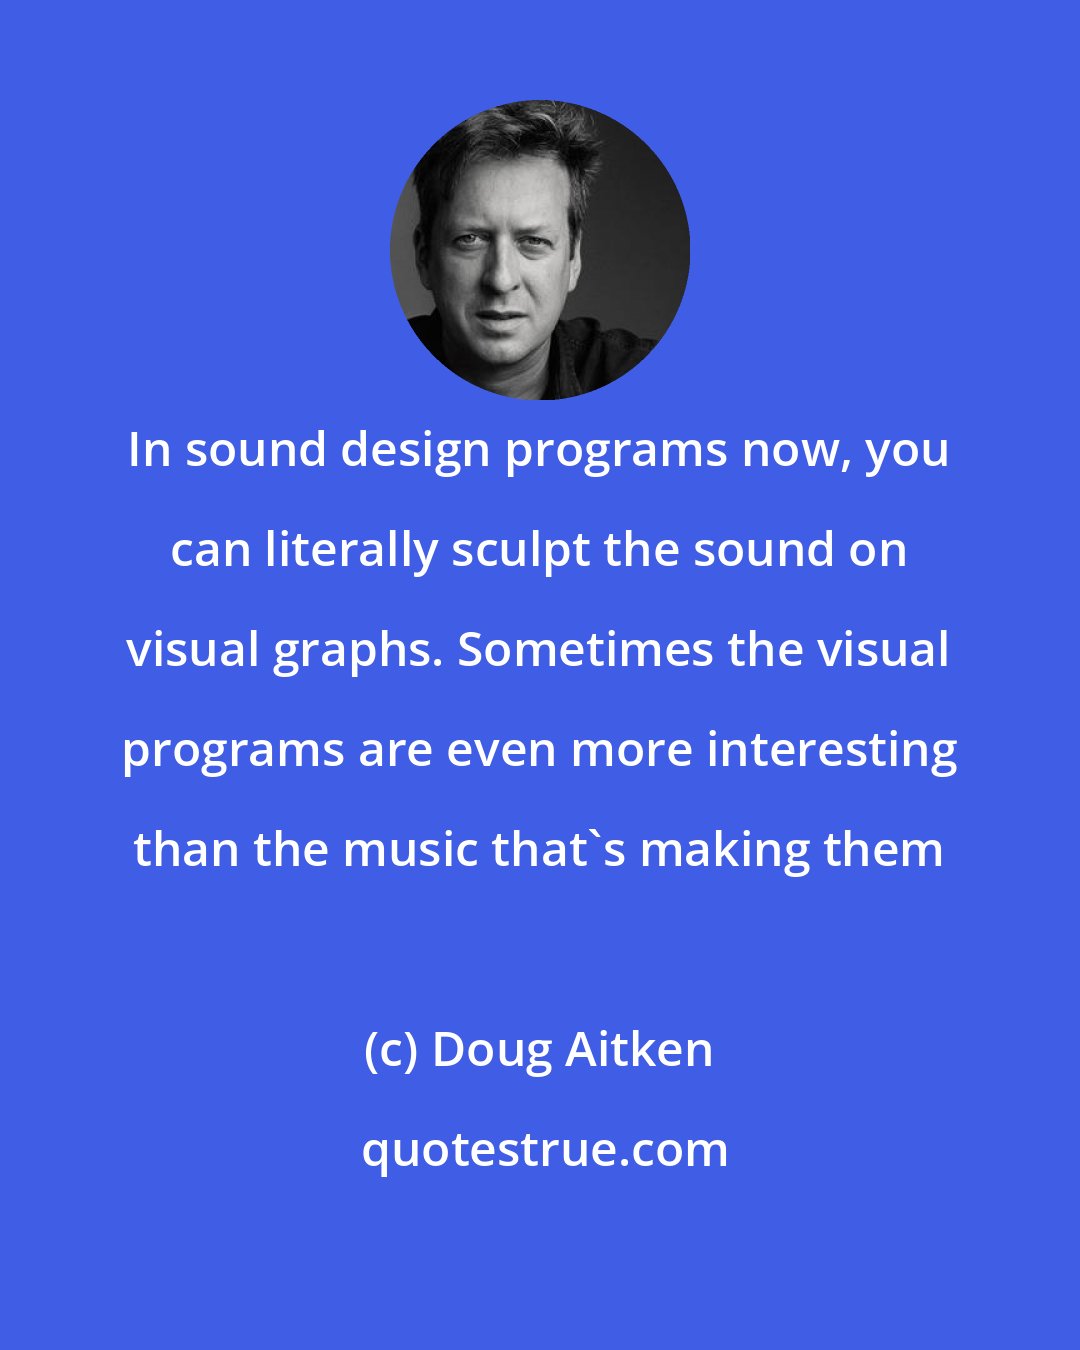 Doug Aitken: In sound design programs now, you can literally sculpt the sound on visual graphs. Sometimes the visual programs are even more interesting than the music that's making them